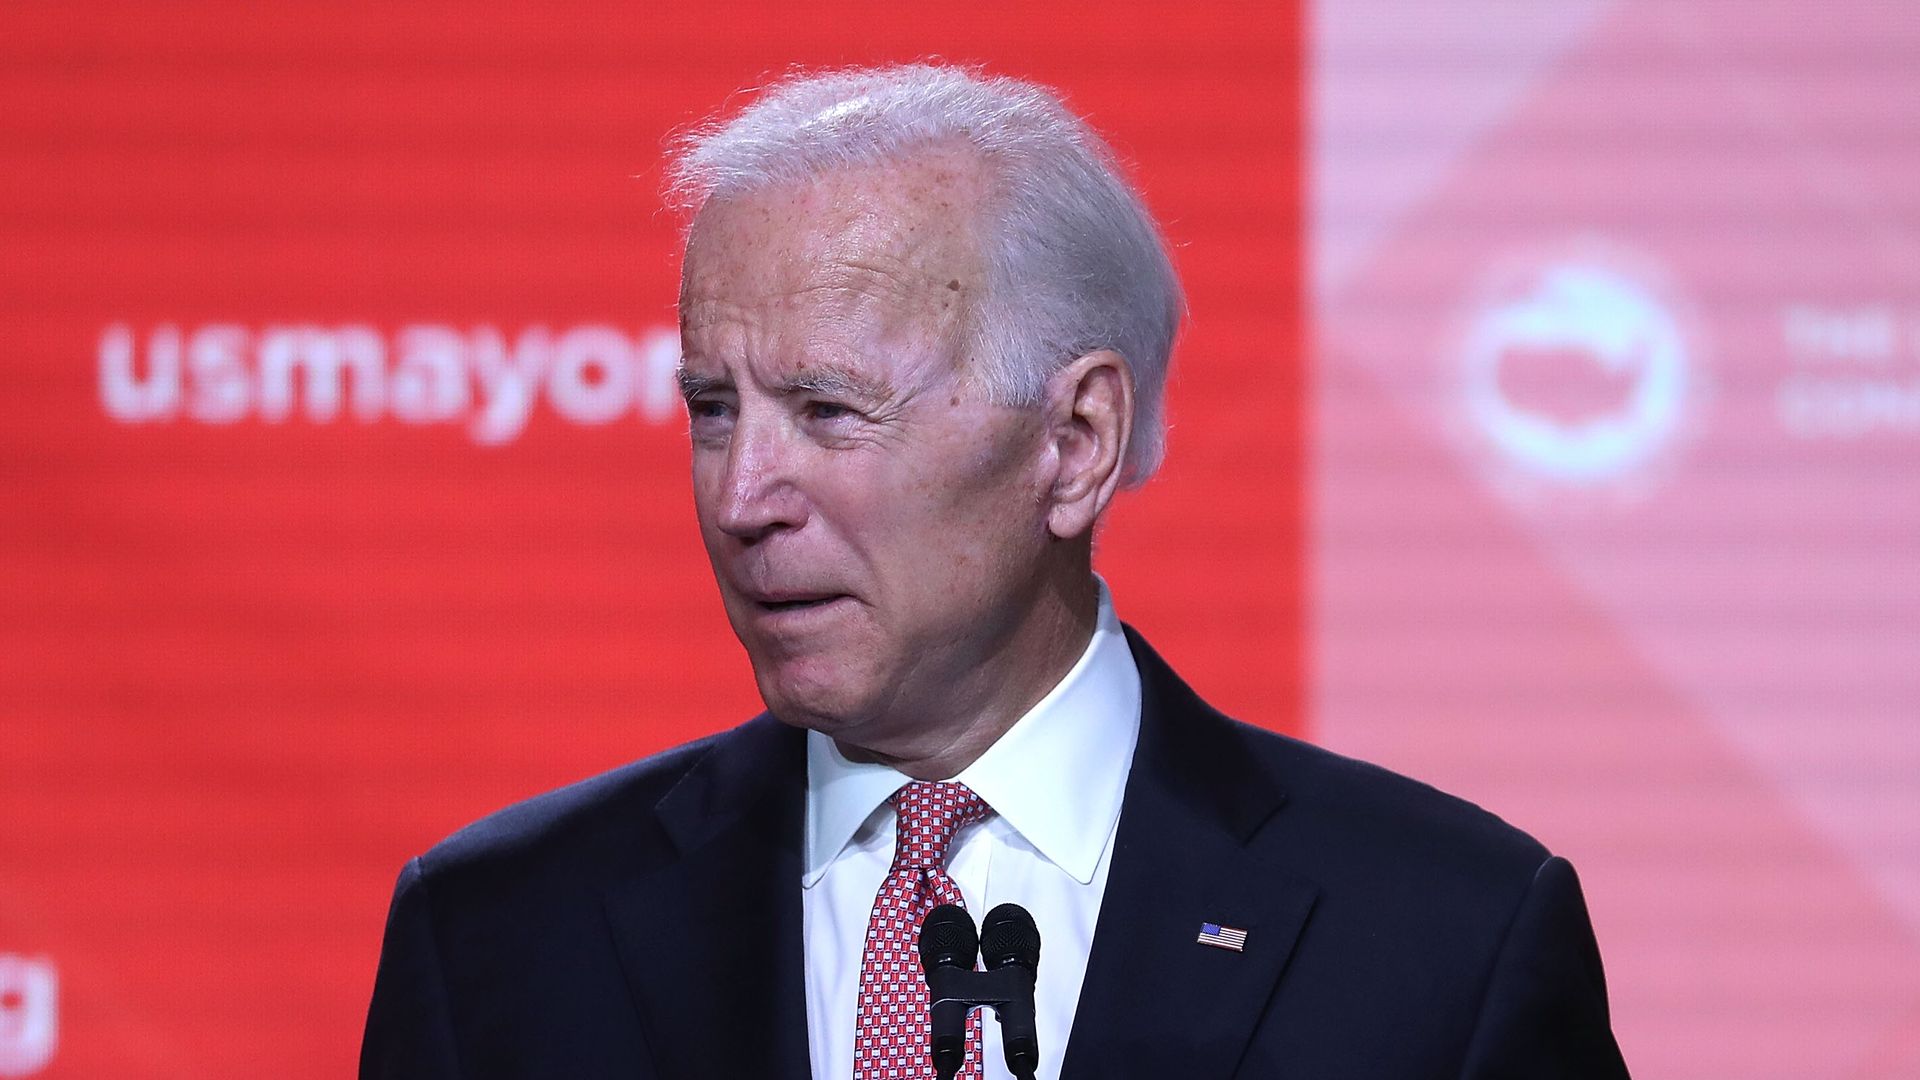 Former Vice President Joe Biden has a 2-percentage-point advantage over his nearest rival in the Iowa poll.